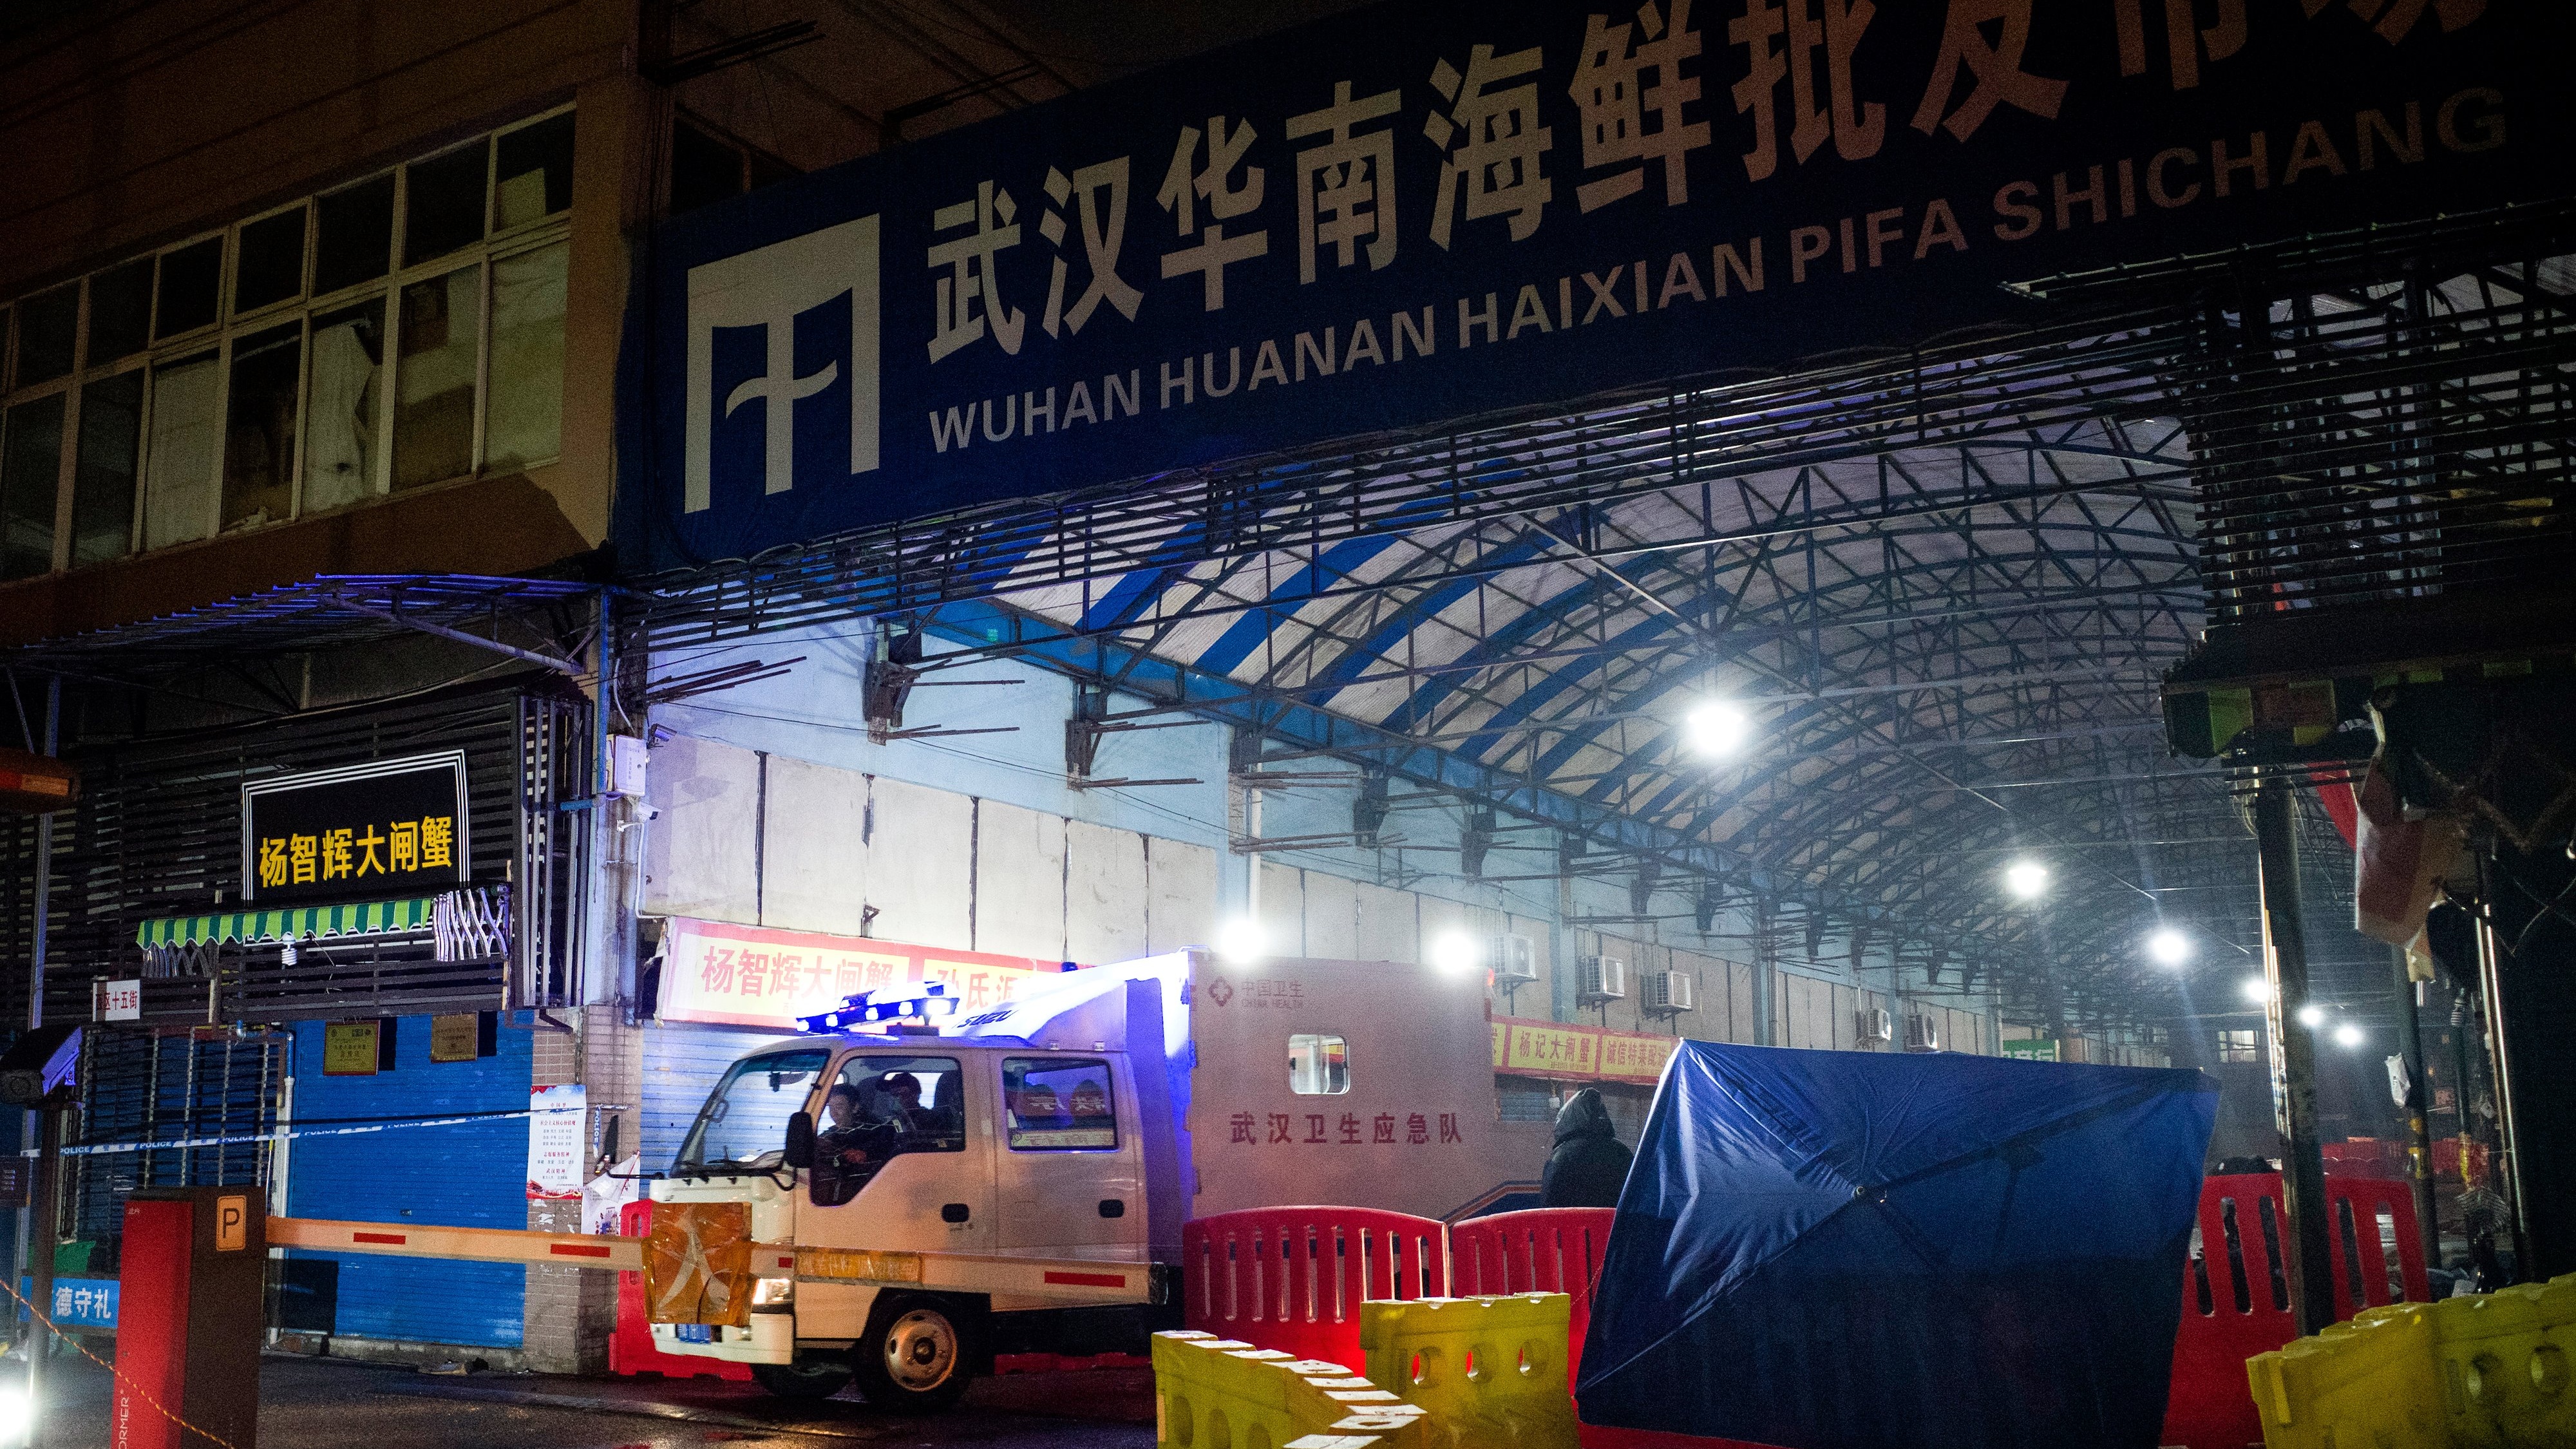 Huanan Seafood Market in Wuhan as been cited as the epicentre of the Covid pandemic